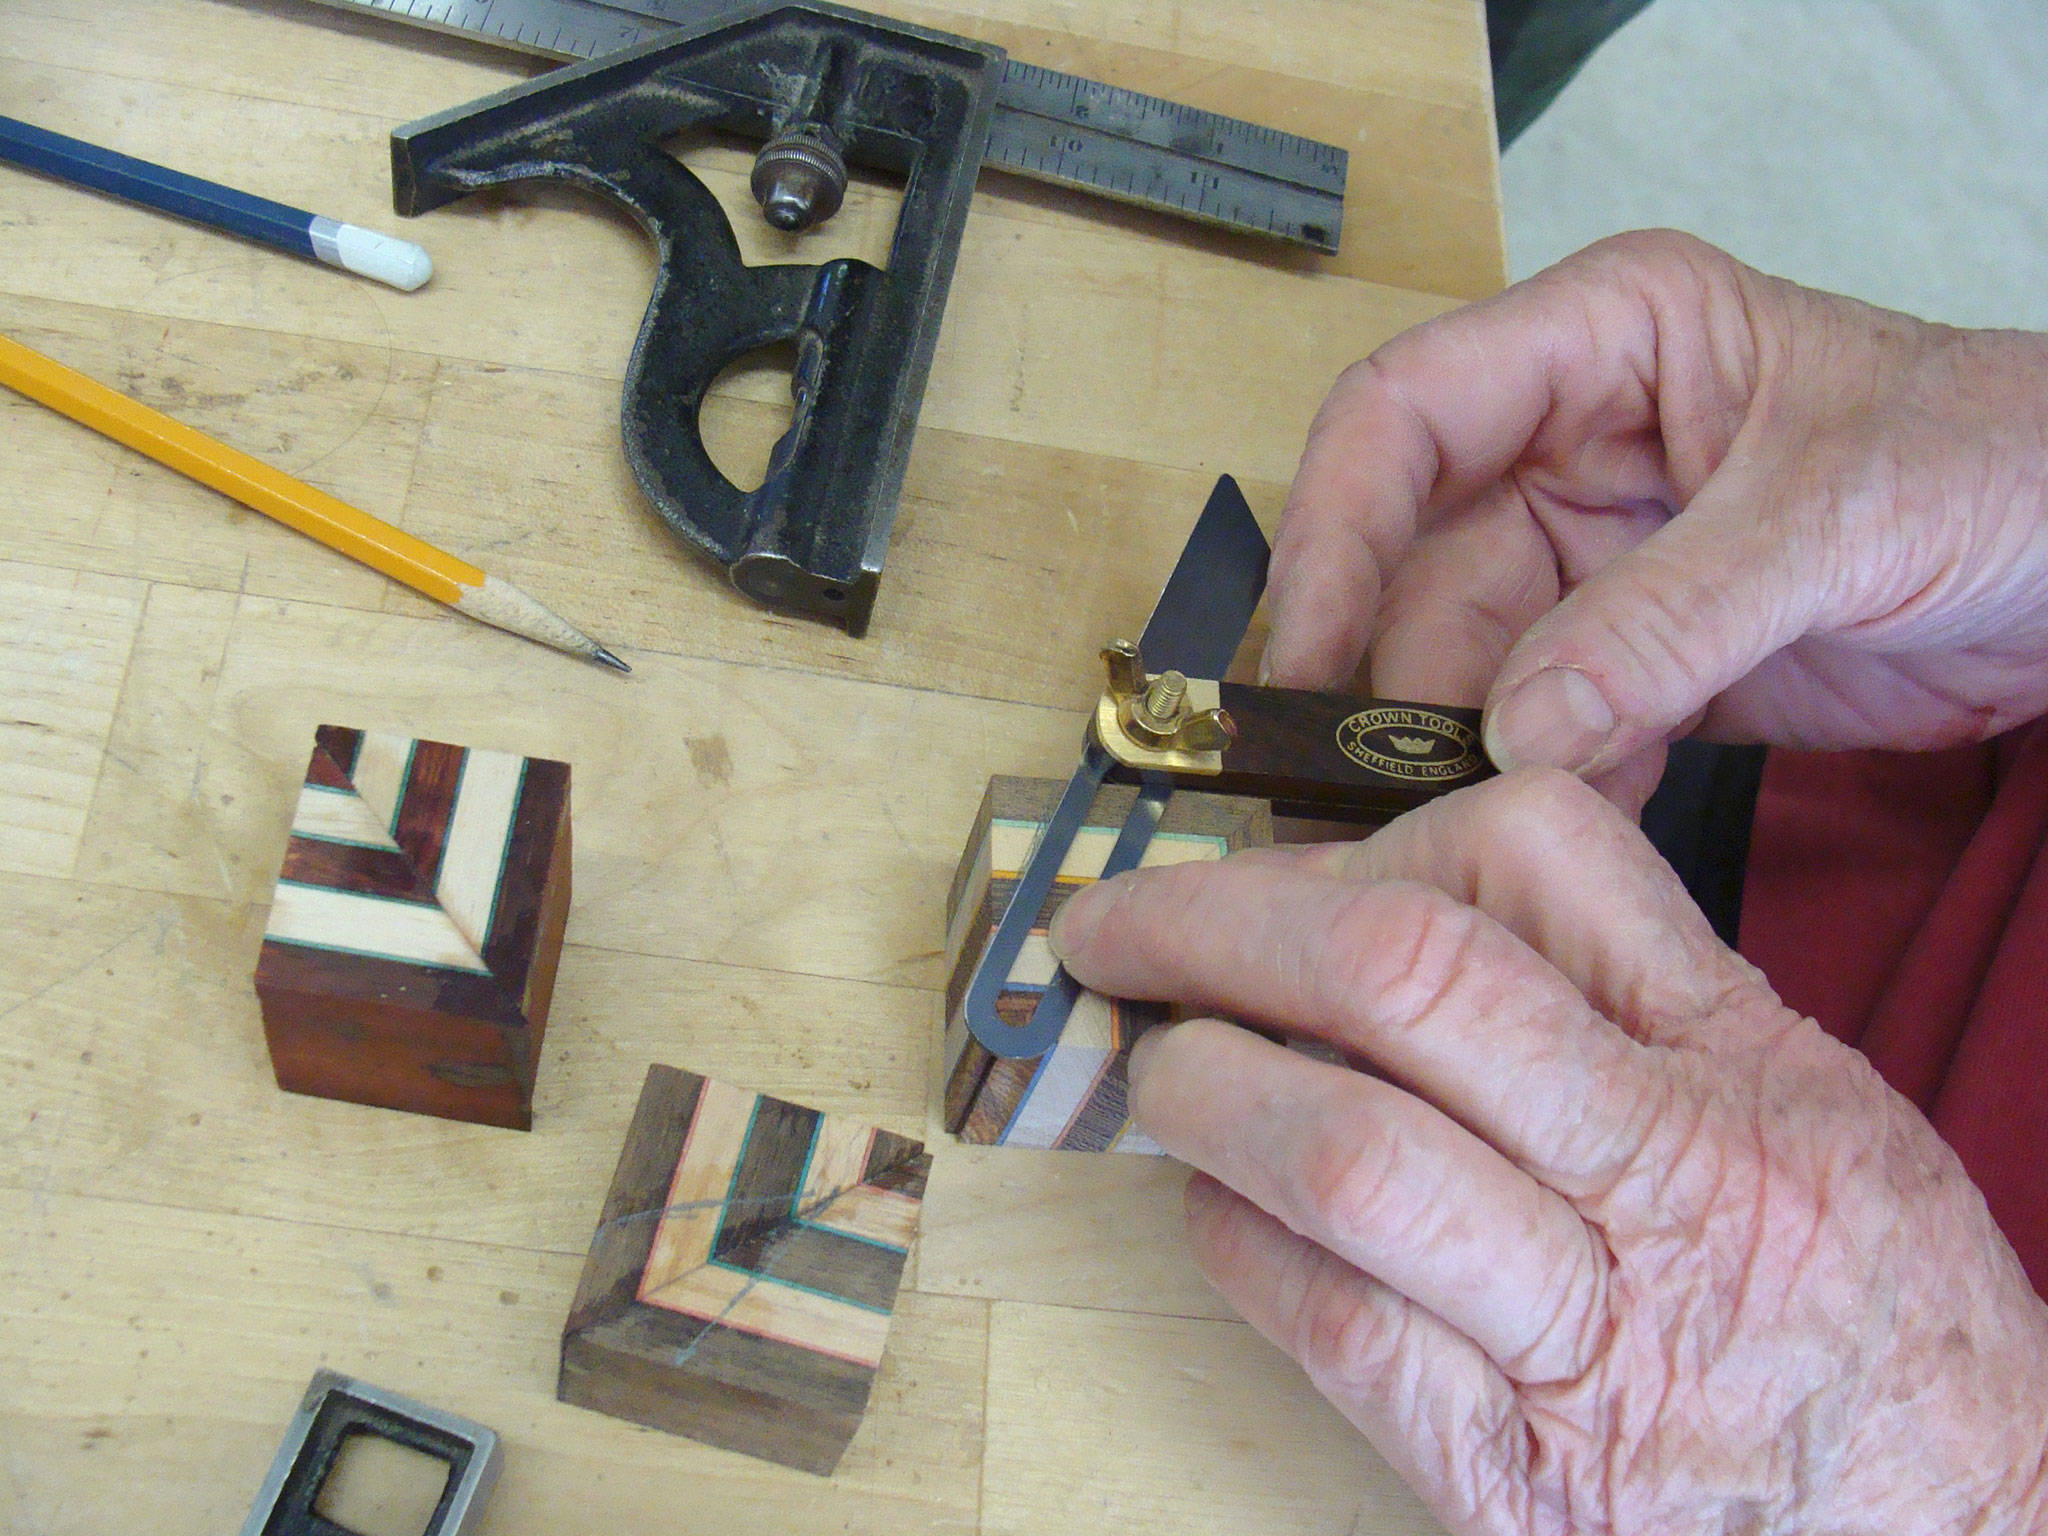 To create symmetry between slices, Martha Collins said angles of each block’s corner must be within 0.002 inches of one another. Photo by Turningsmith Studios